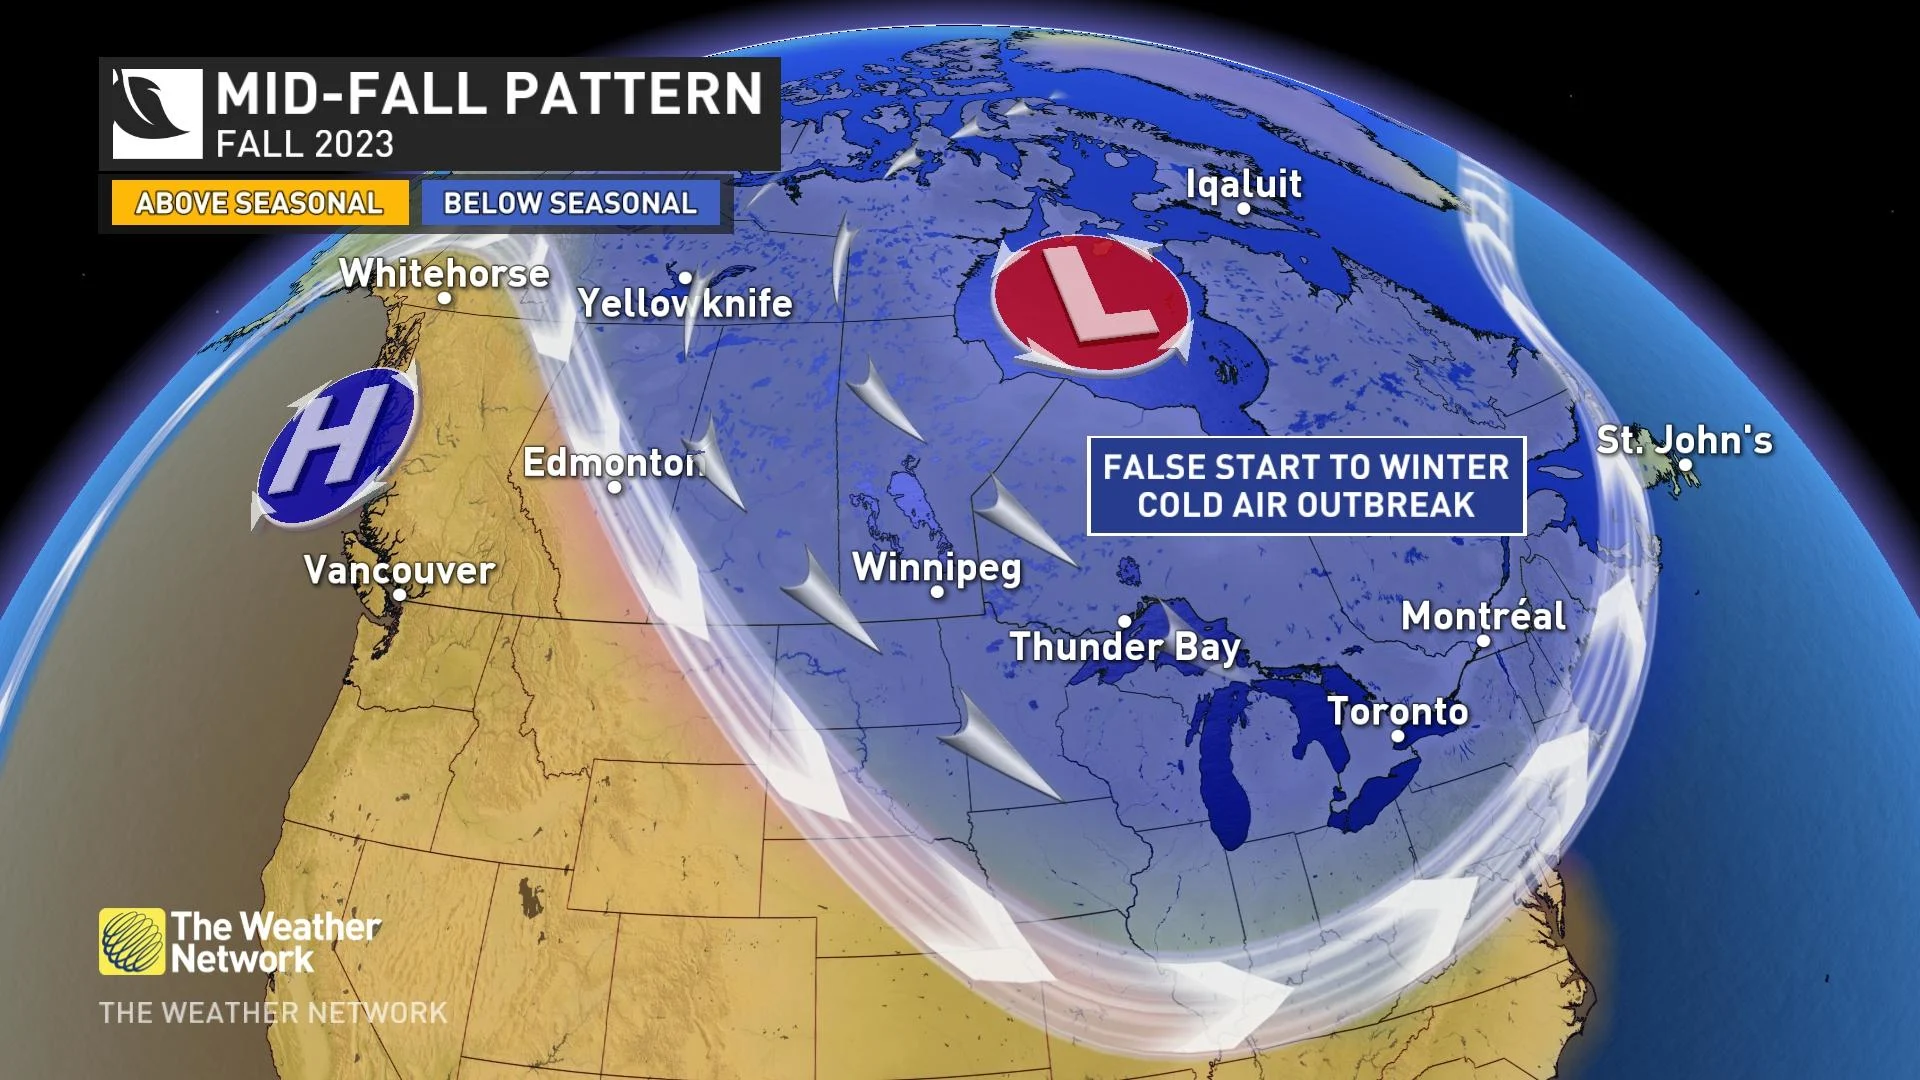 Mid-fall pattern for Canada in 2023/The Weather Network